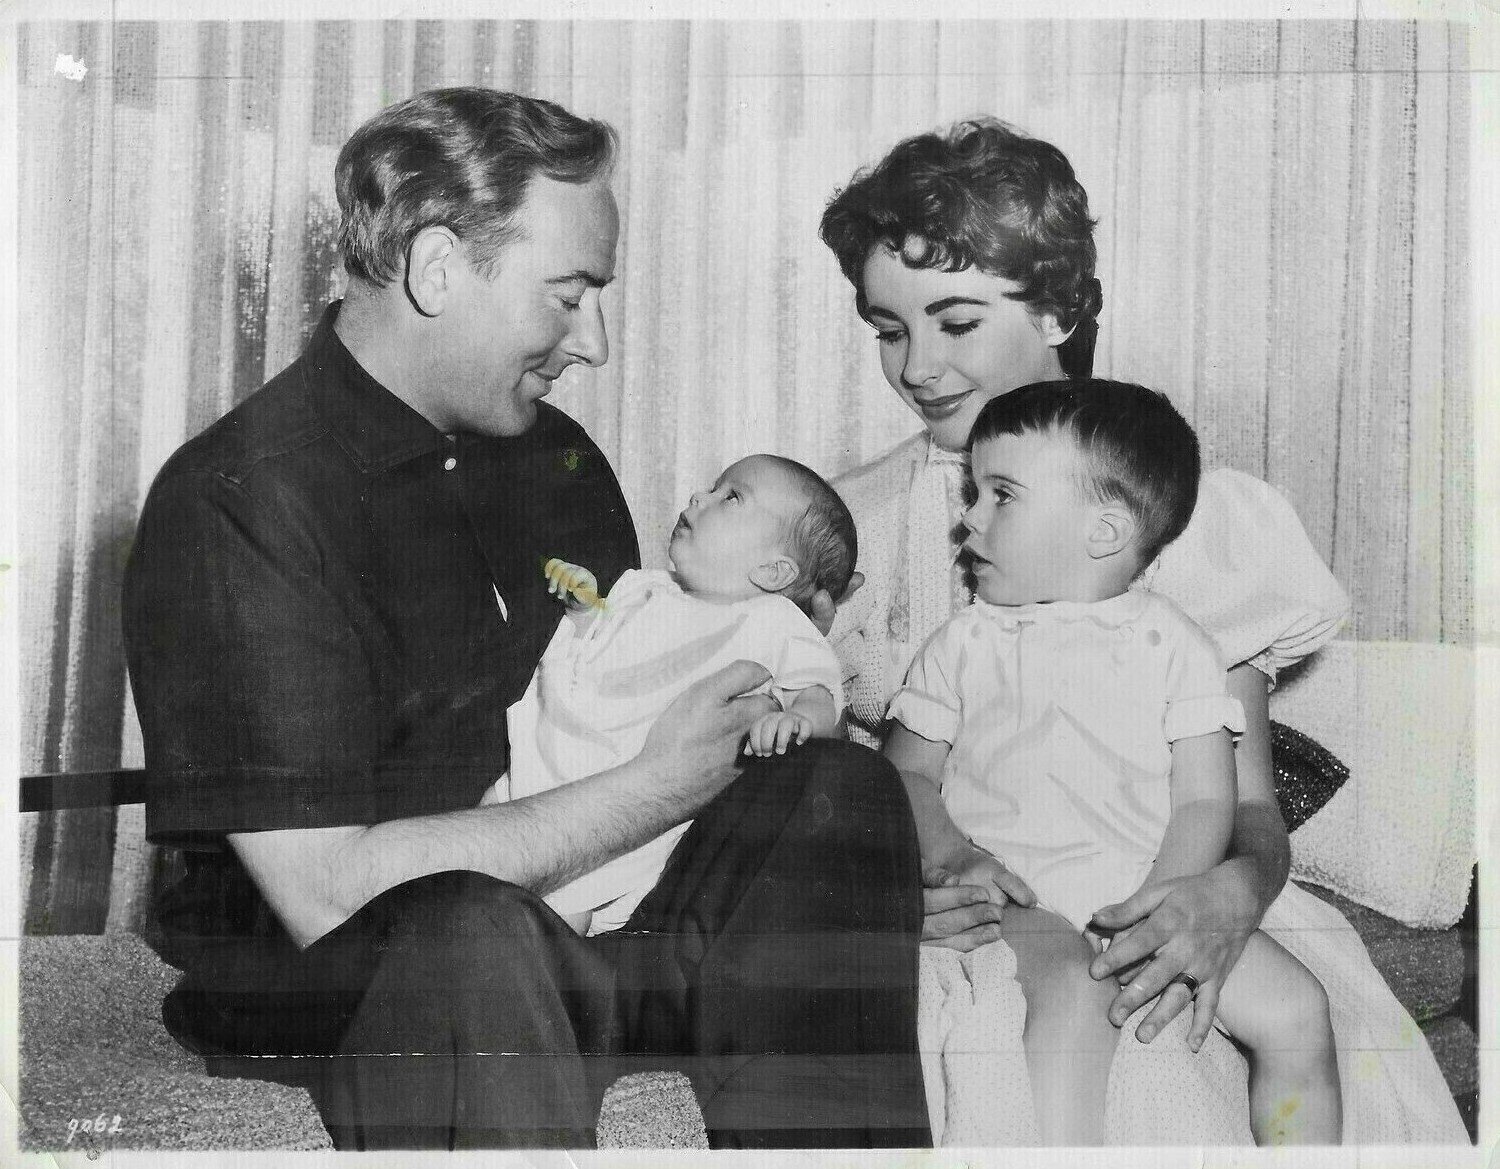 Elizabeth Taylor and her second husband Michael Wilding with their children Christopher Edward Wilding and Michael Wilding, Jr., September 1956. | Source: Wikimedia Commons